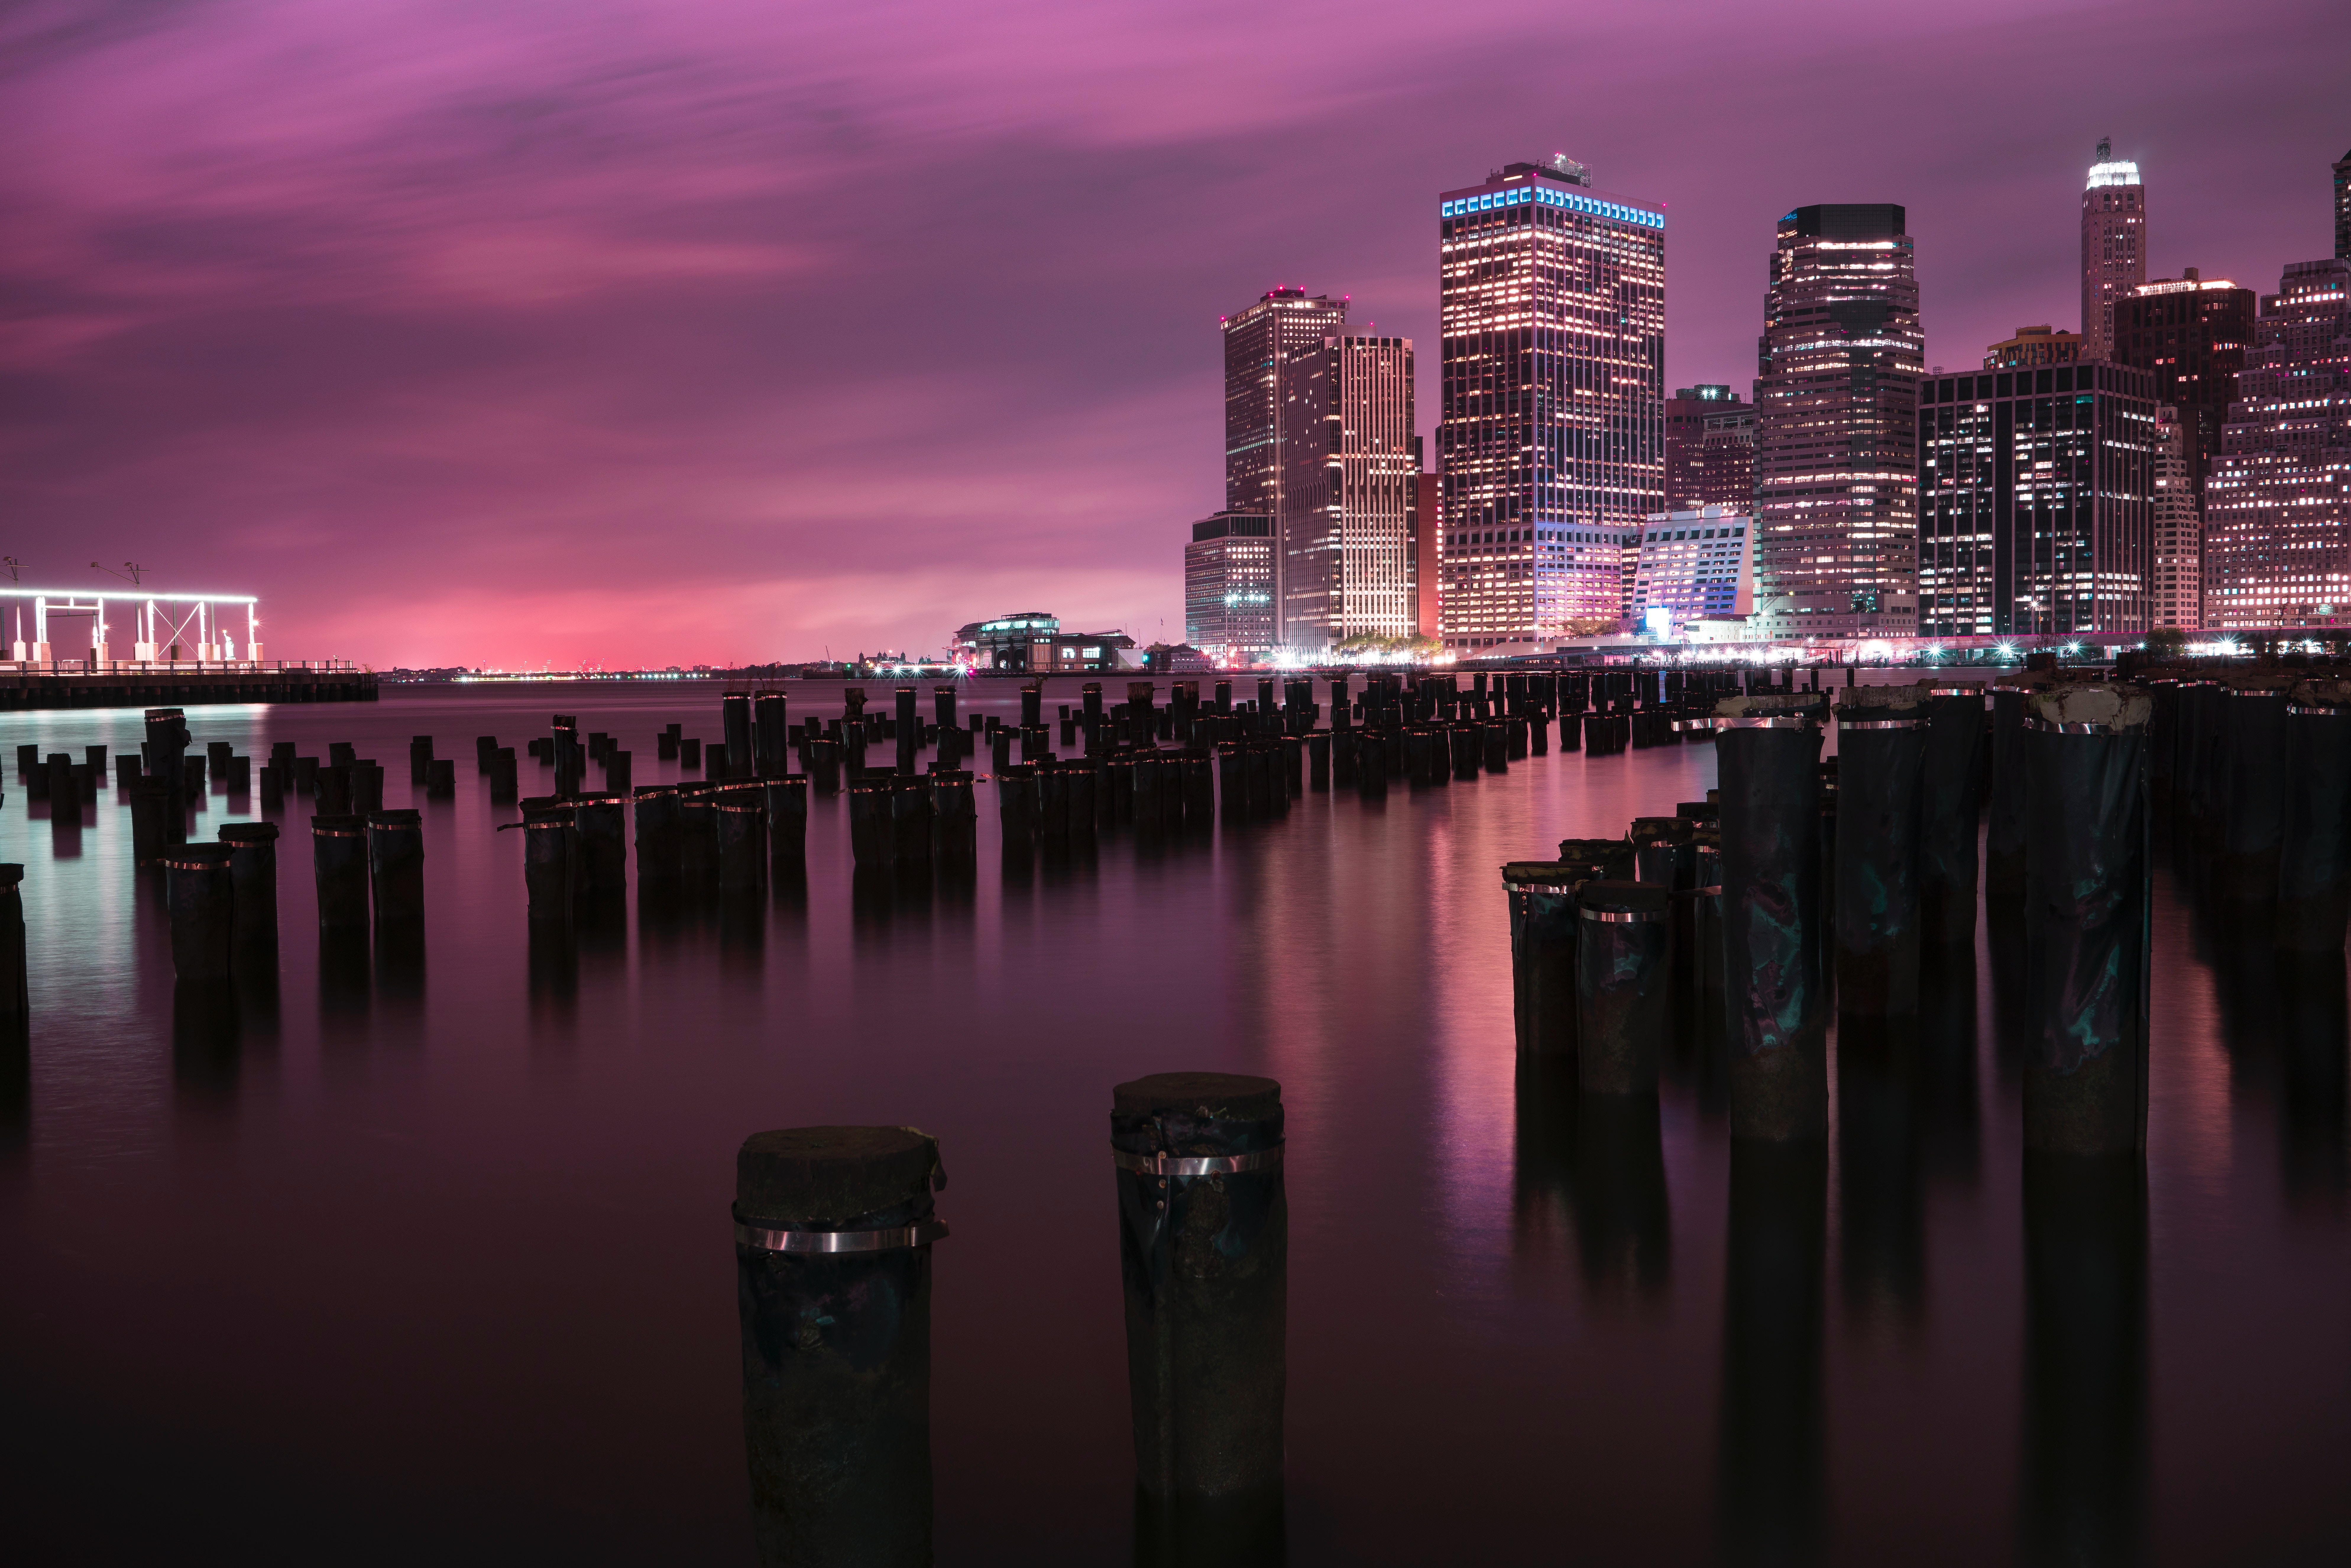 usa, night city, city lights, shore, bank, cities, building, united states